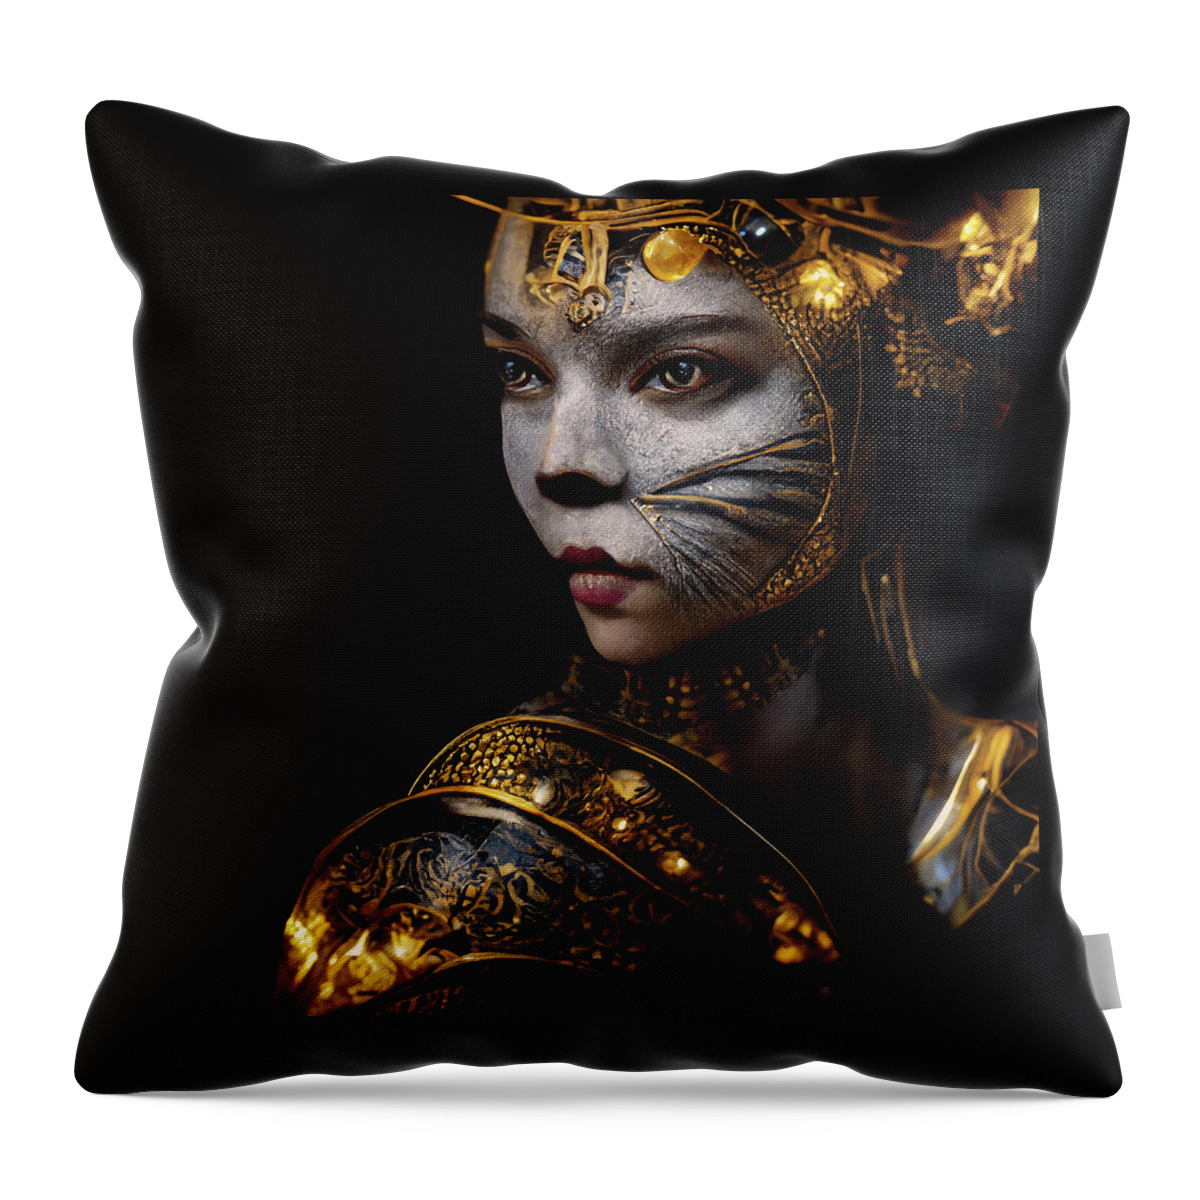 Women Warriors Throw Pillow featuring the digital art Golda the Exotic Cat Warrior Queen by Peggy Collins